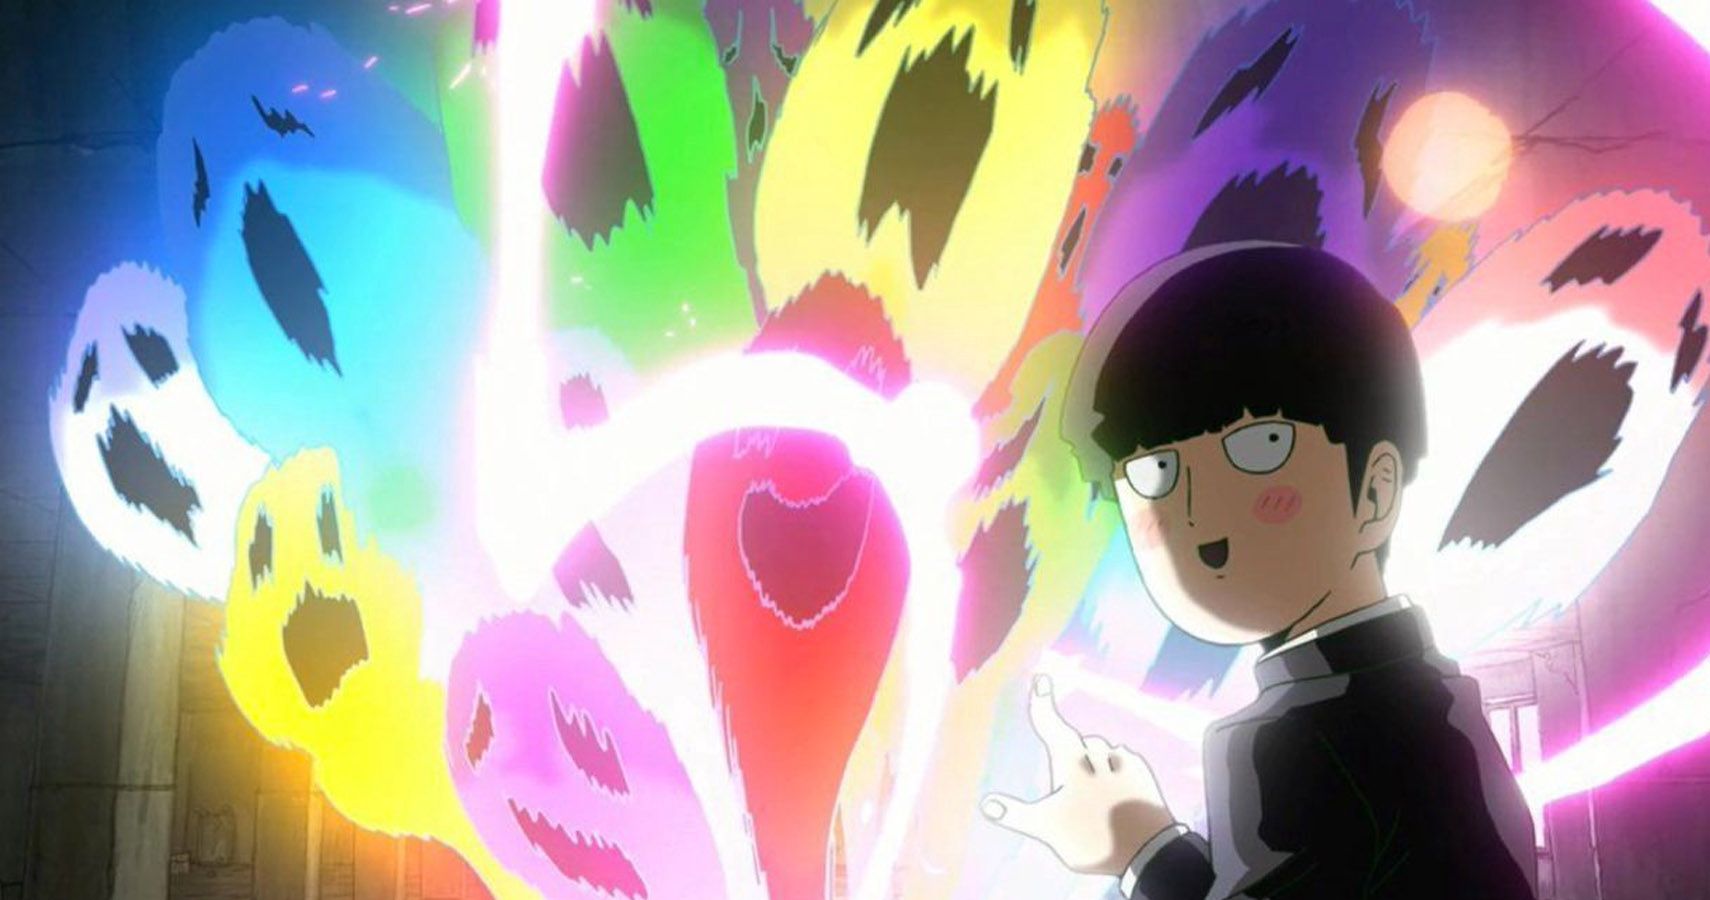 Which Mob Psycho 100 Character Are You, Based On Your MBTI®?